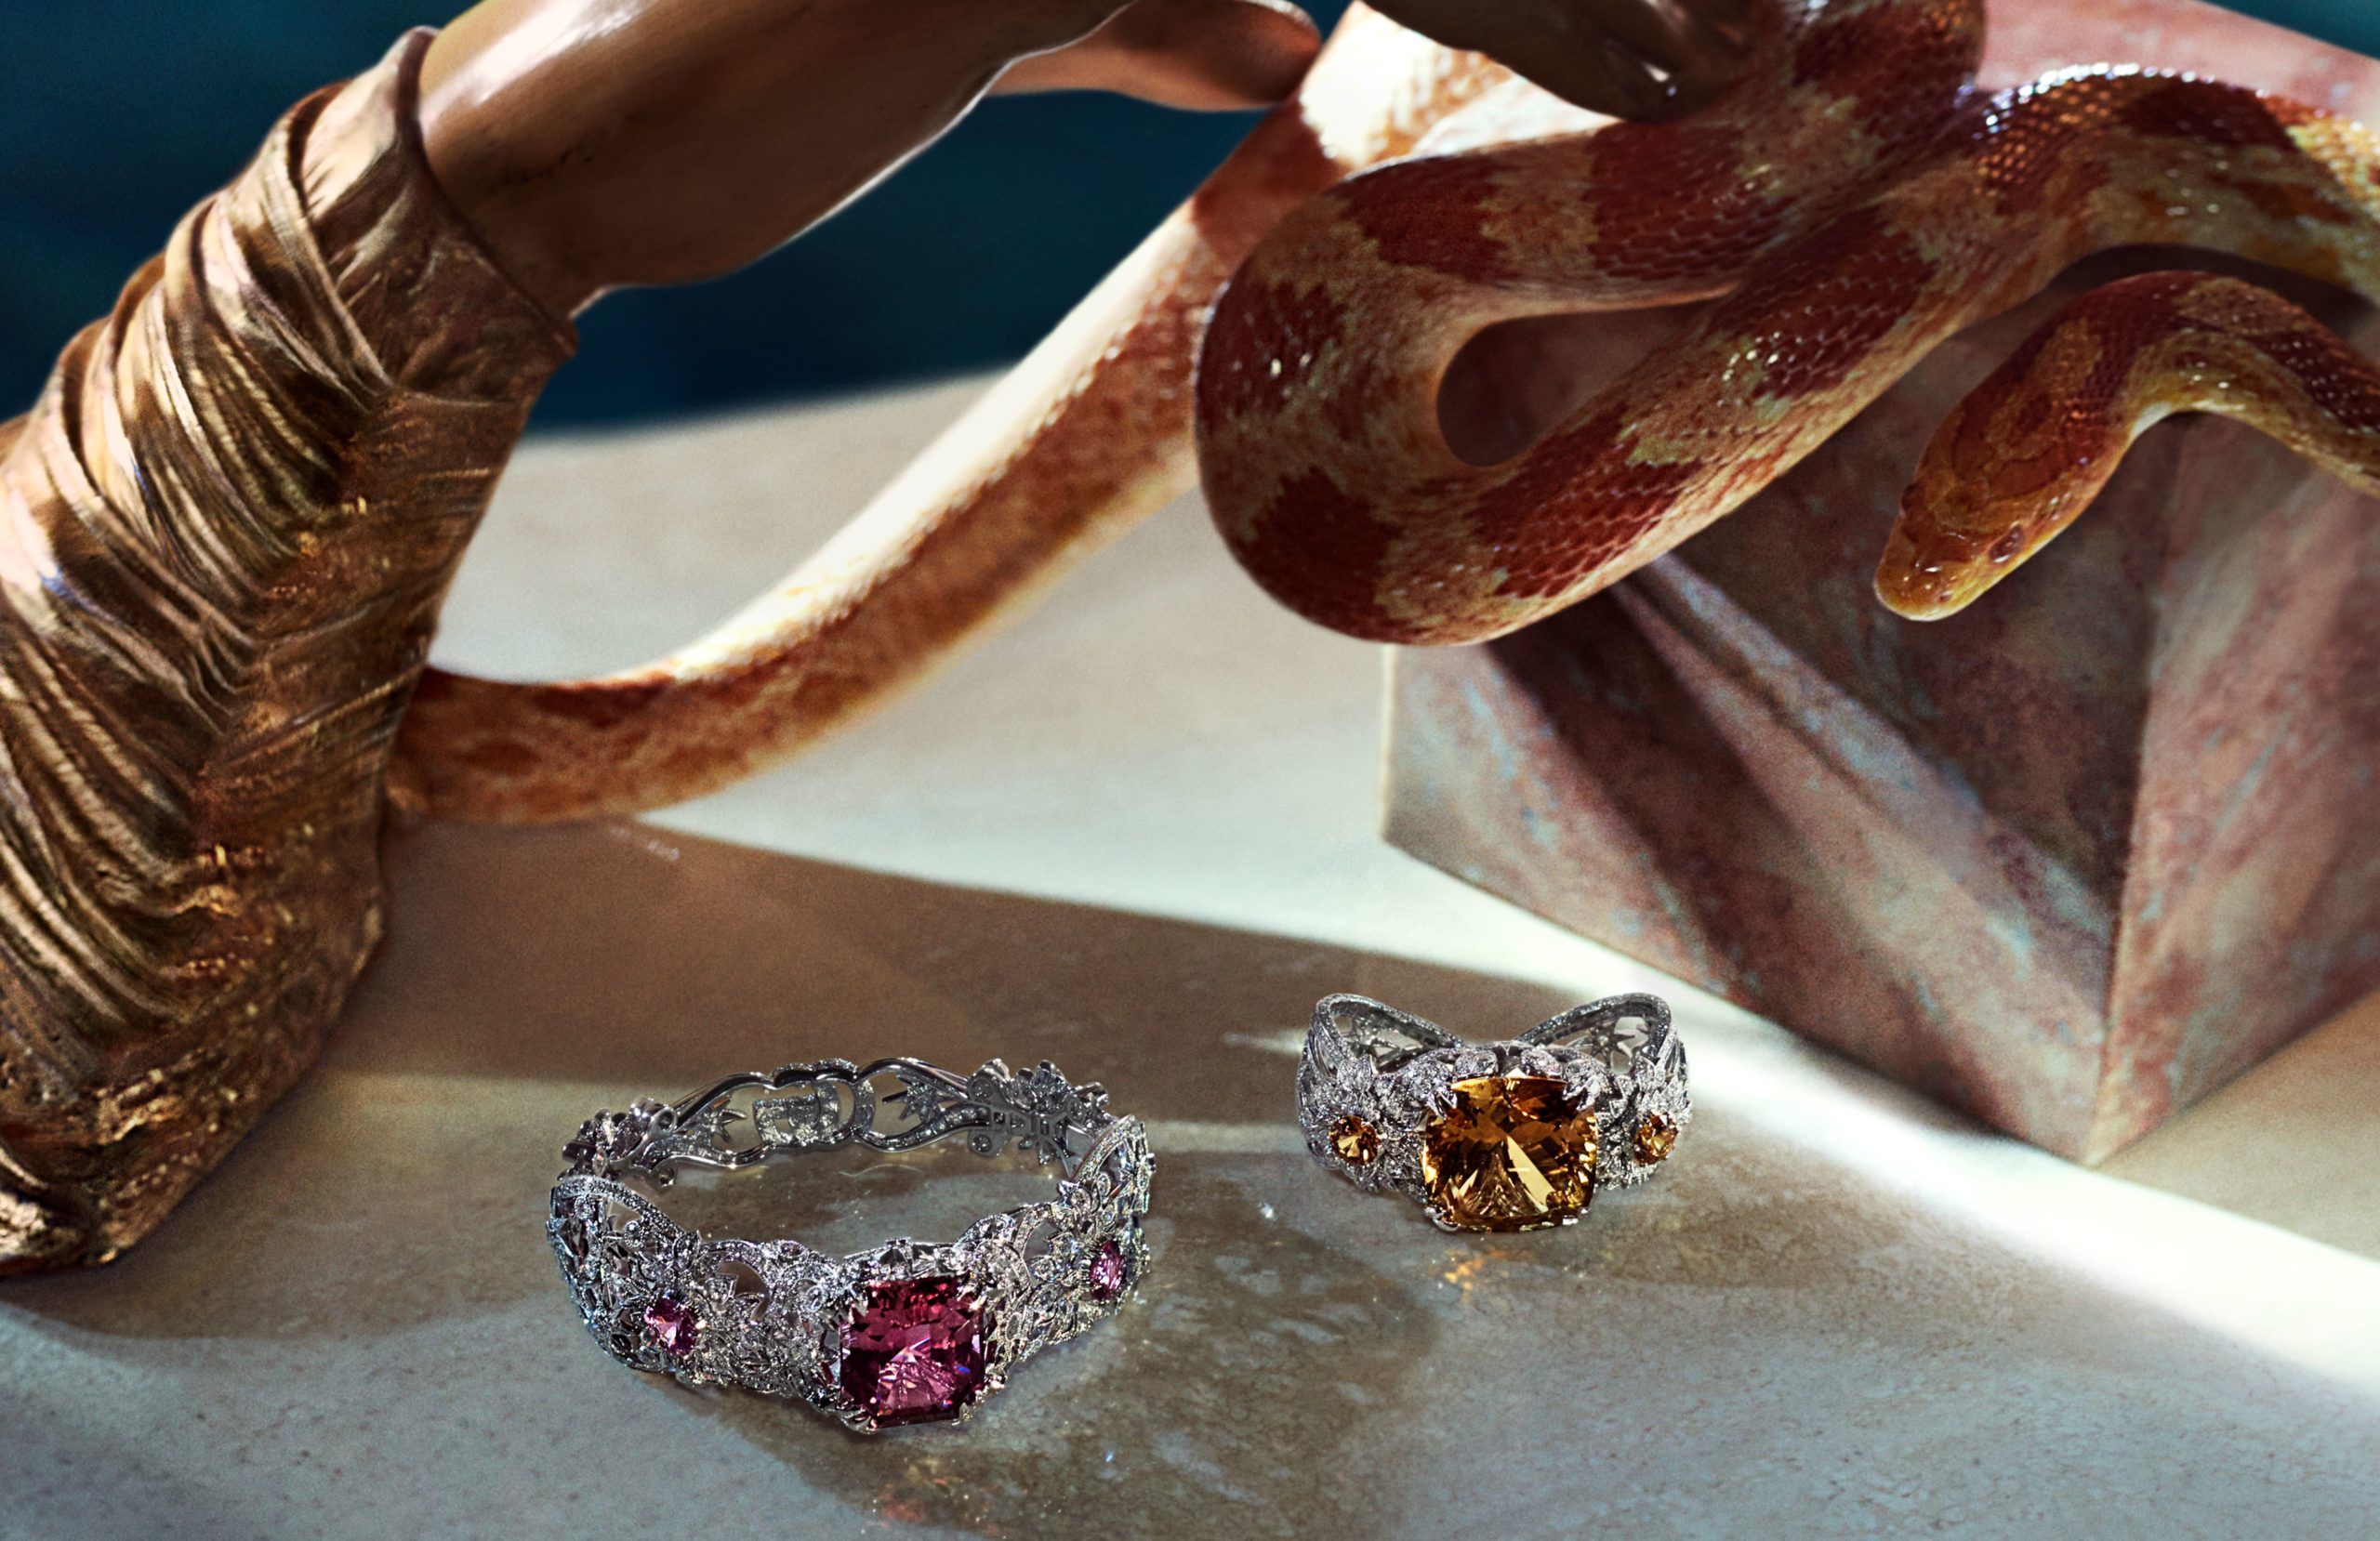 The allure of Louis Vuitton's new high jewellery collection